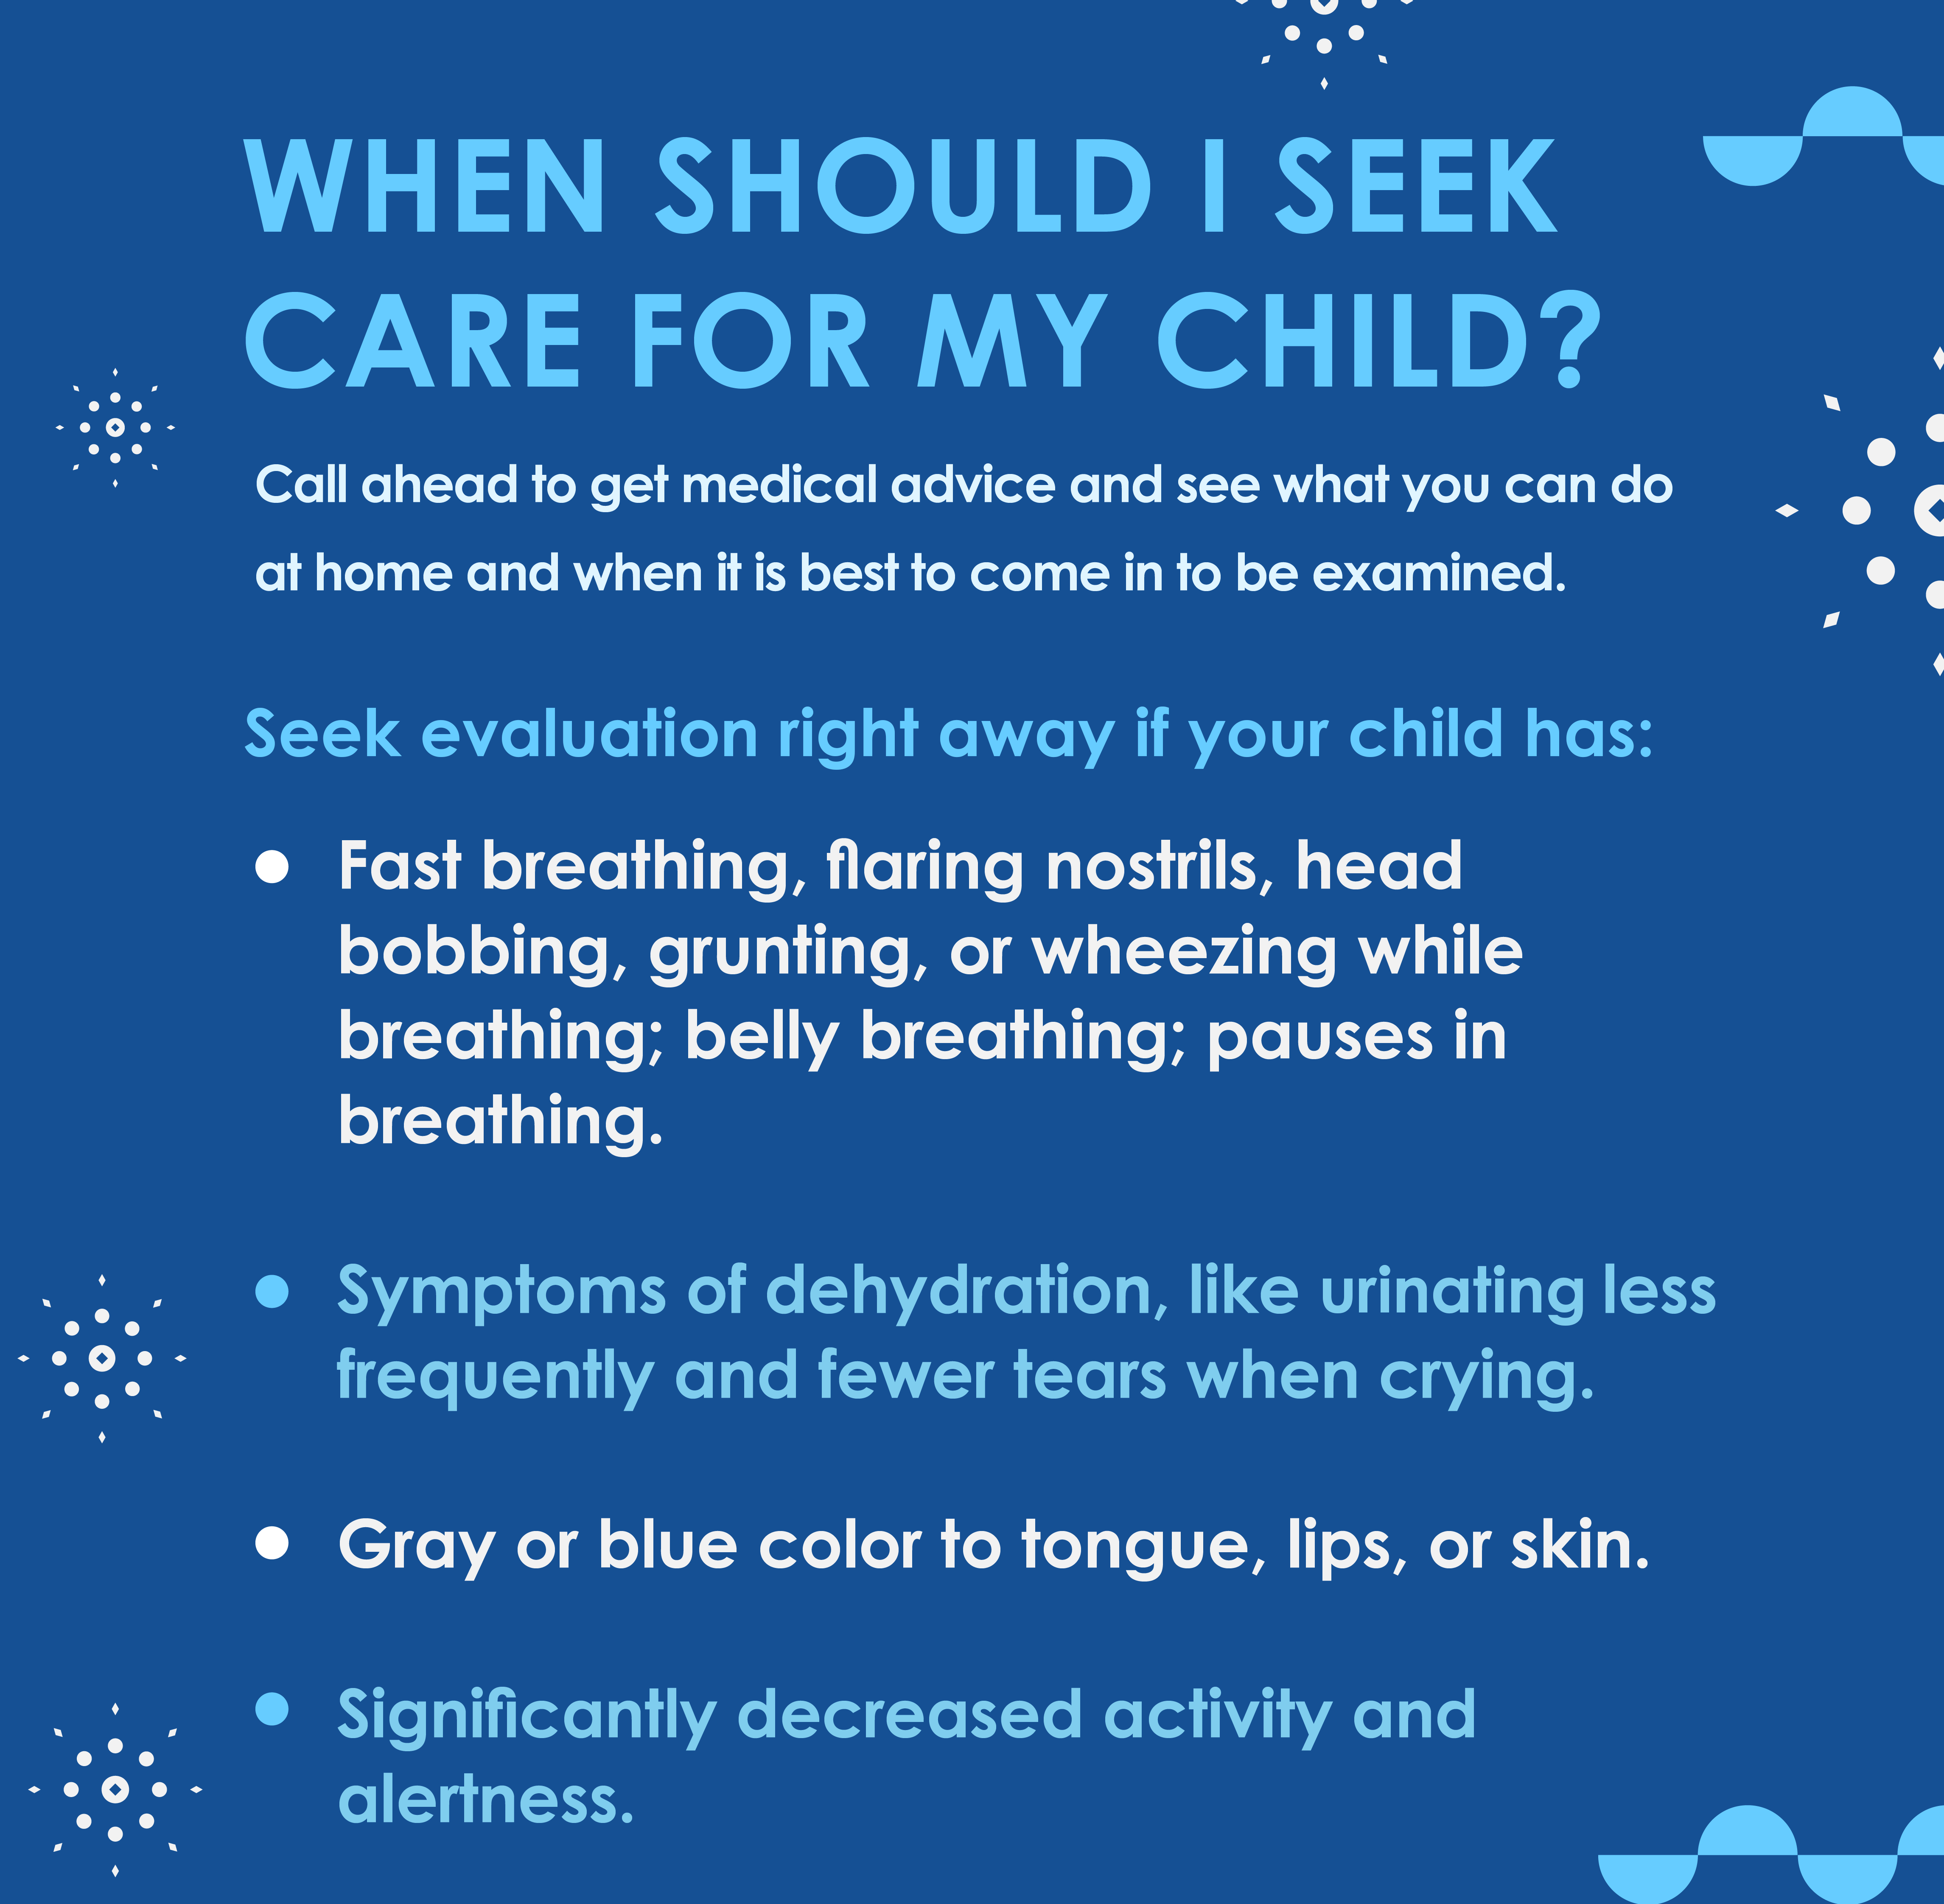 Tips for parents about winter viruses